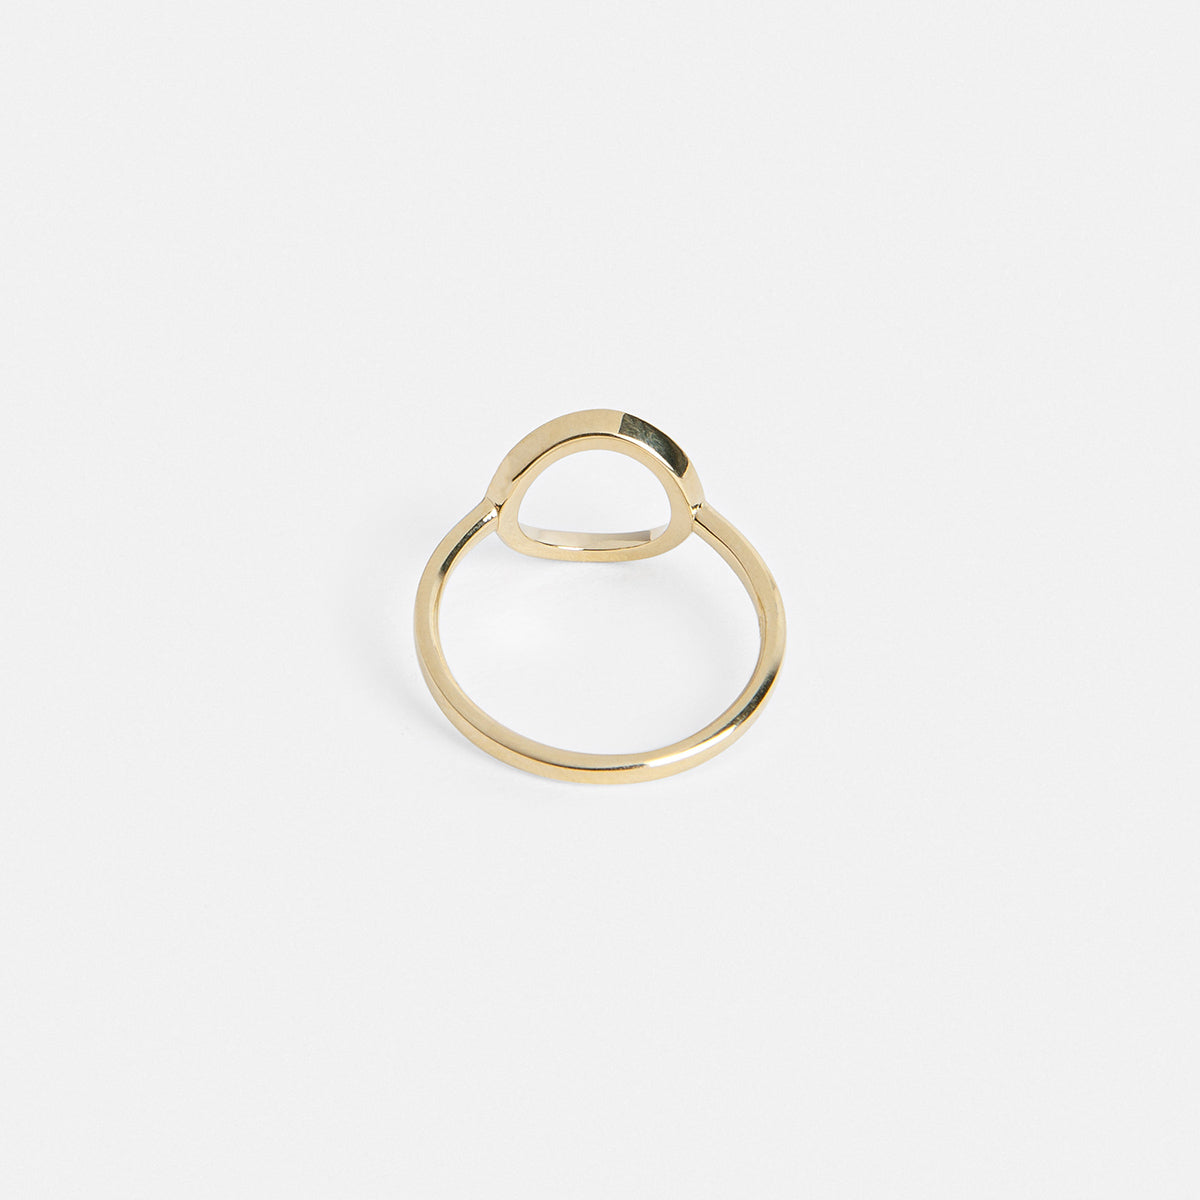 Nida Cool Ring in 14k Gold set with White Diamonds by SHW Fine Jewelry